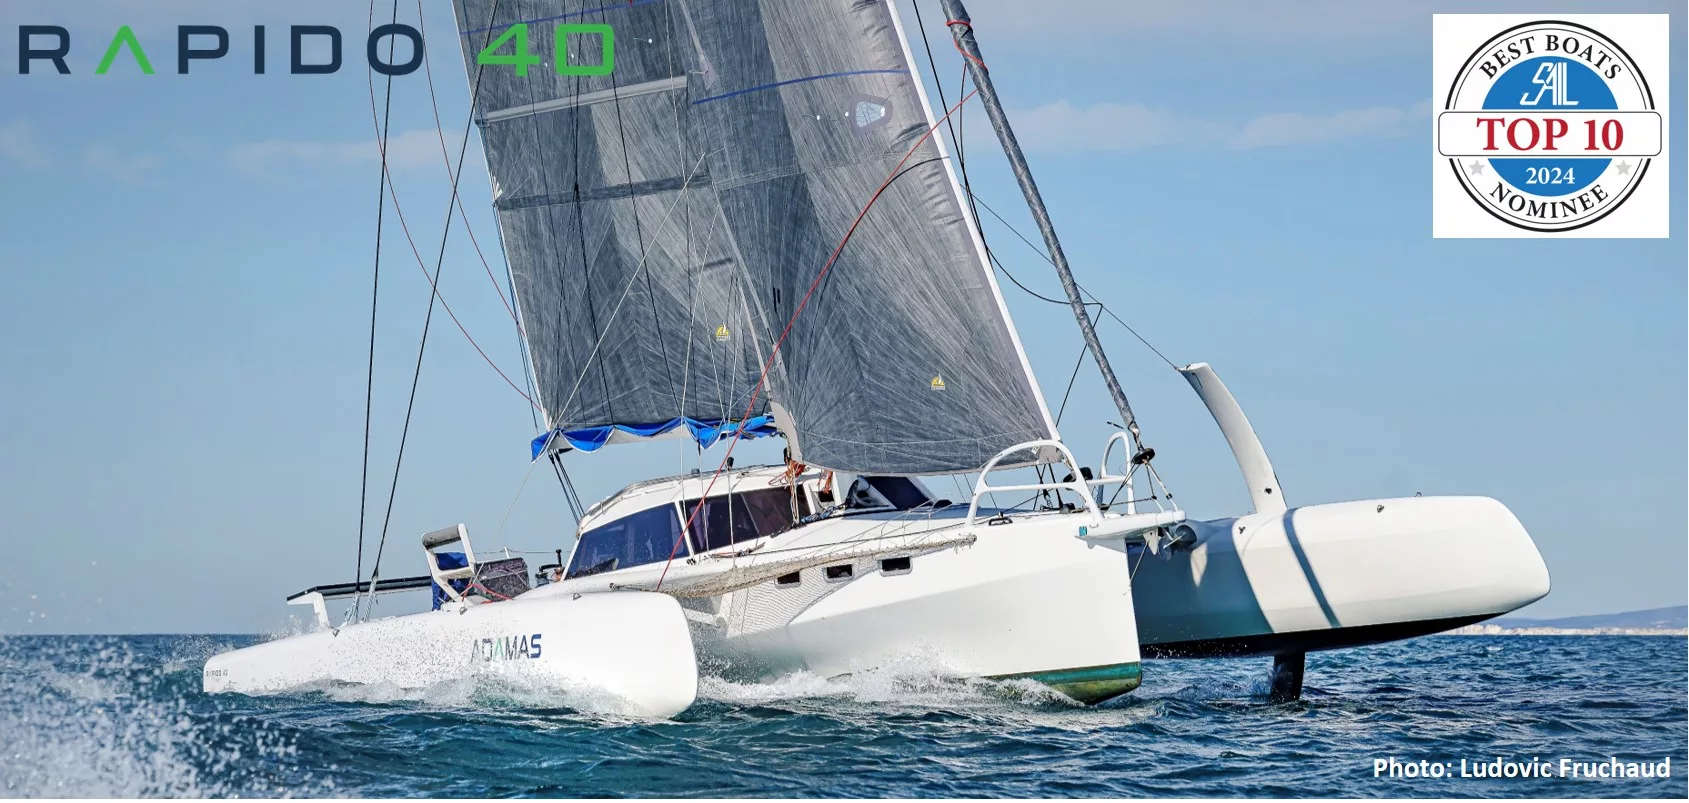 Rapido 40 nominated: SAIL Top 10 Best Boats 2024